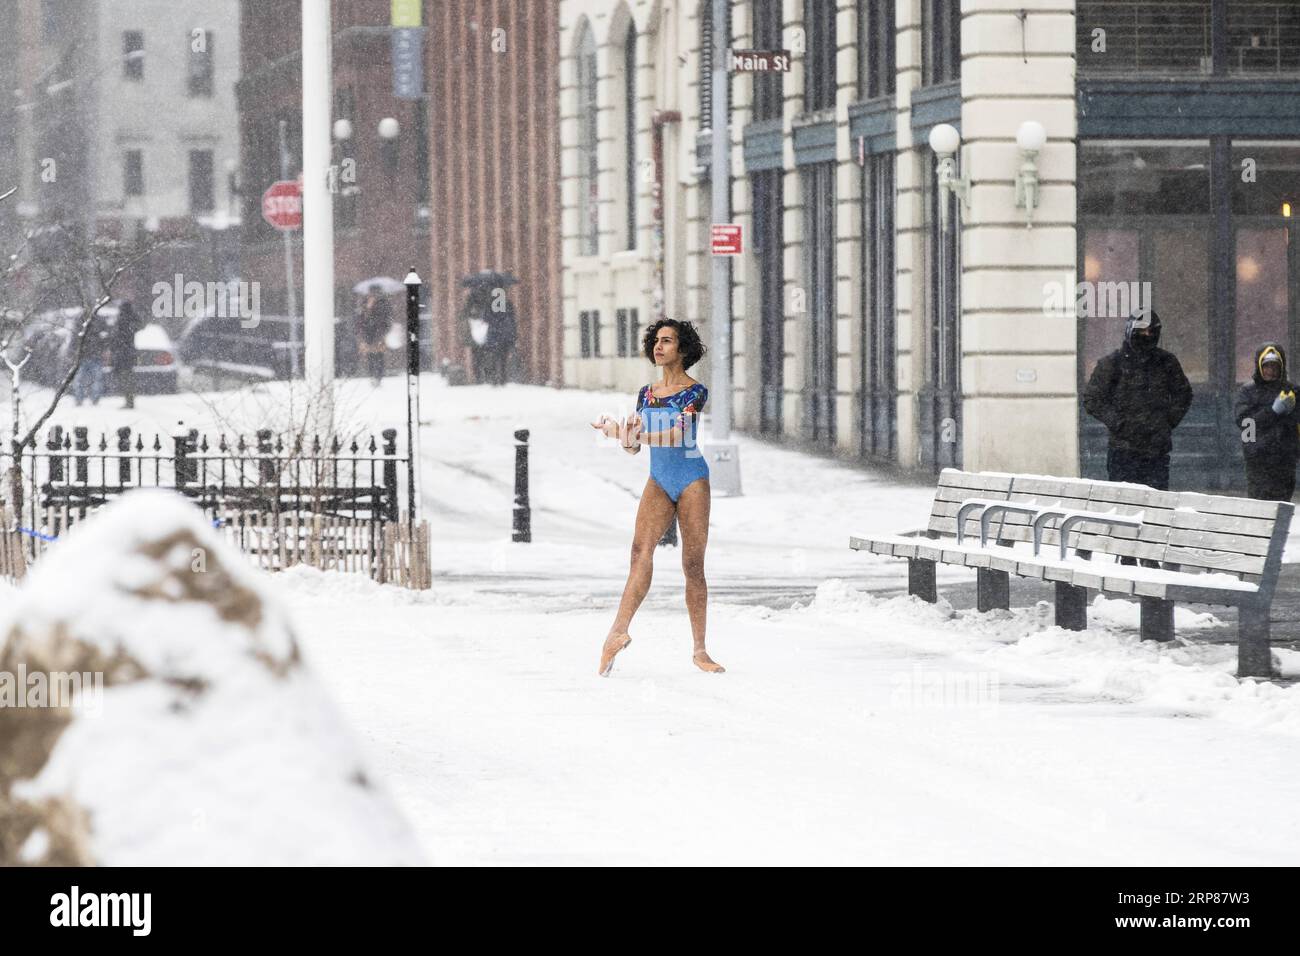 (190221) -- BEIJING, Feb. 21, 2019 -- A girl poses for photos in snow near the Brooklyn Bridge in New York, the United States, Feb. 20, 2019. More than 1,000 flights were canceled in airports across the United States Wednesday as a snow storm hit the east coast, including major cities of New York, Philadelphia and Washington D.C. ) XINHUA PHOTOS OF THE DAY WangxYing PUBLICATIONxNOTxINxCHN Stock Photo